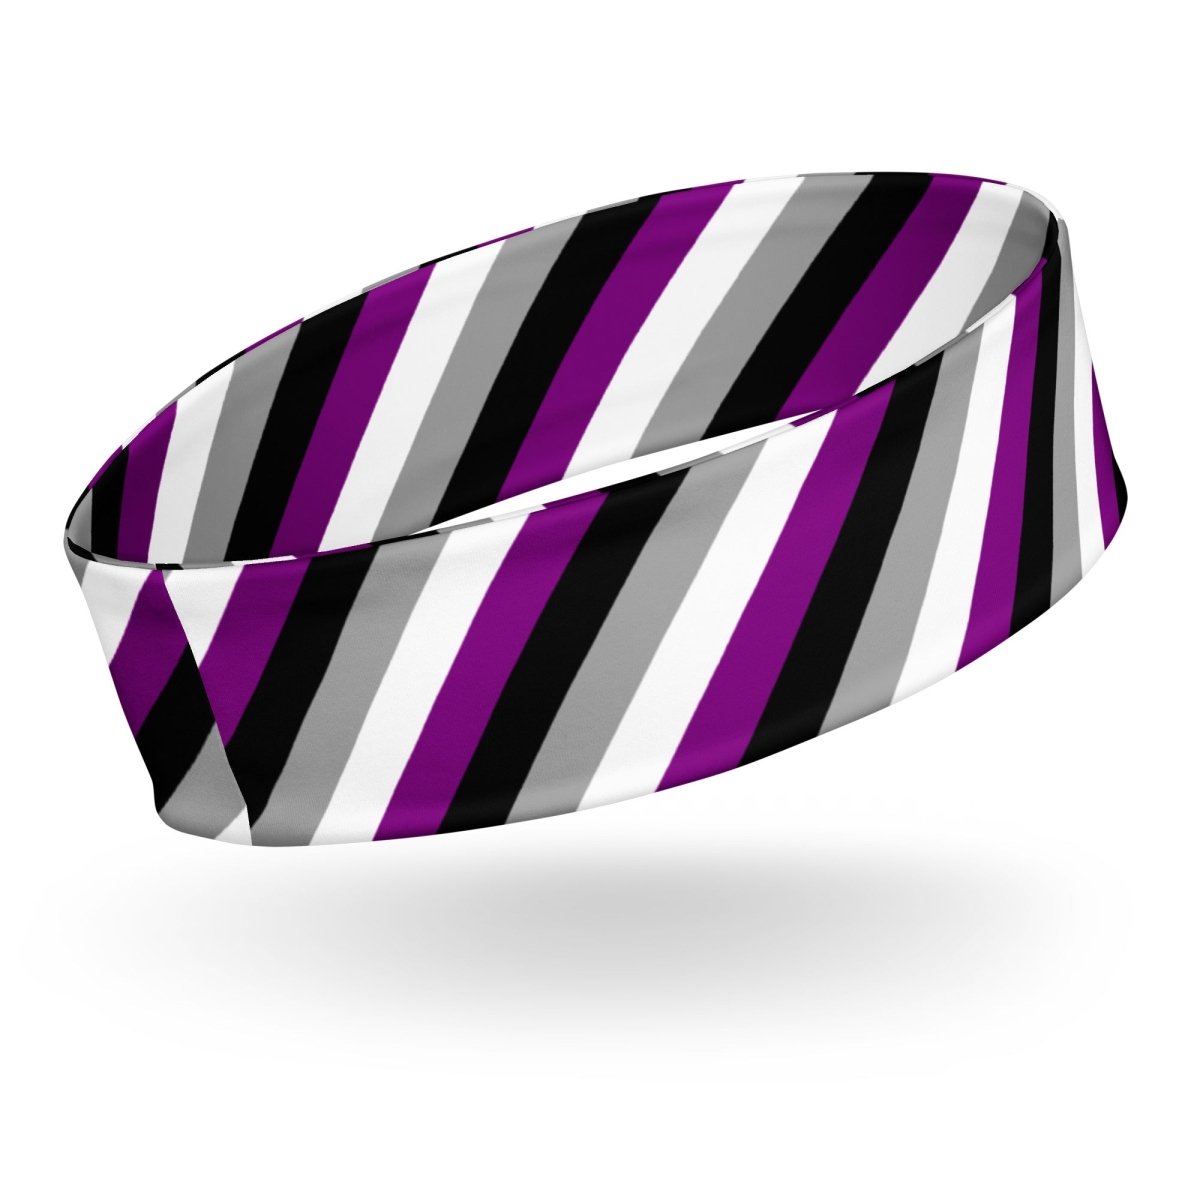 Asexual Pride Flag Headband - On Trend Shirts